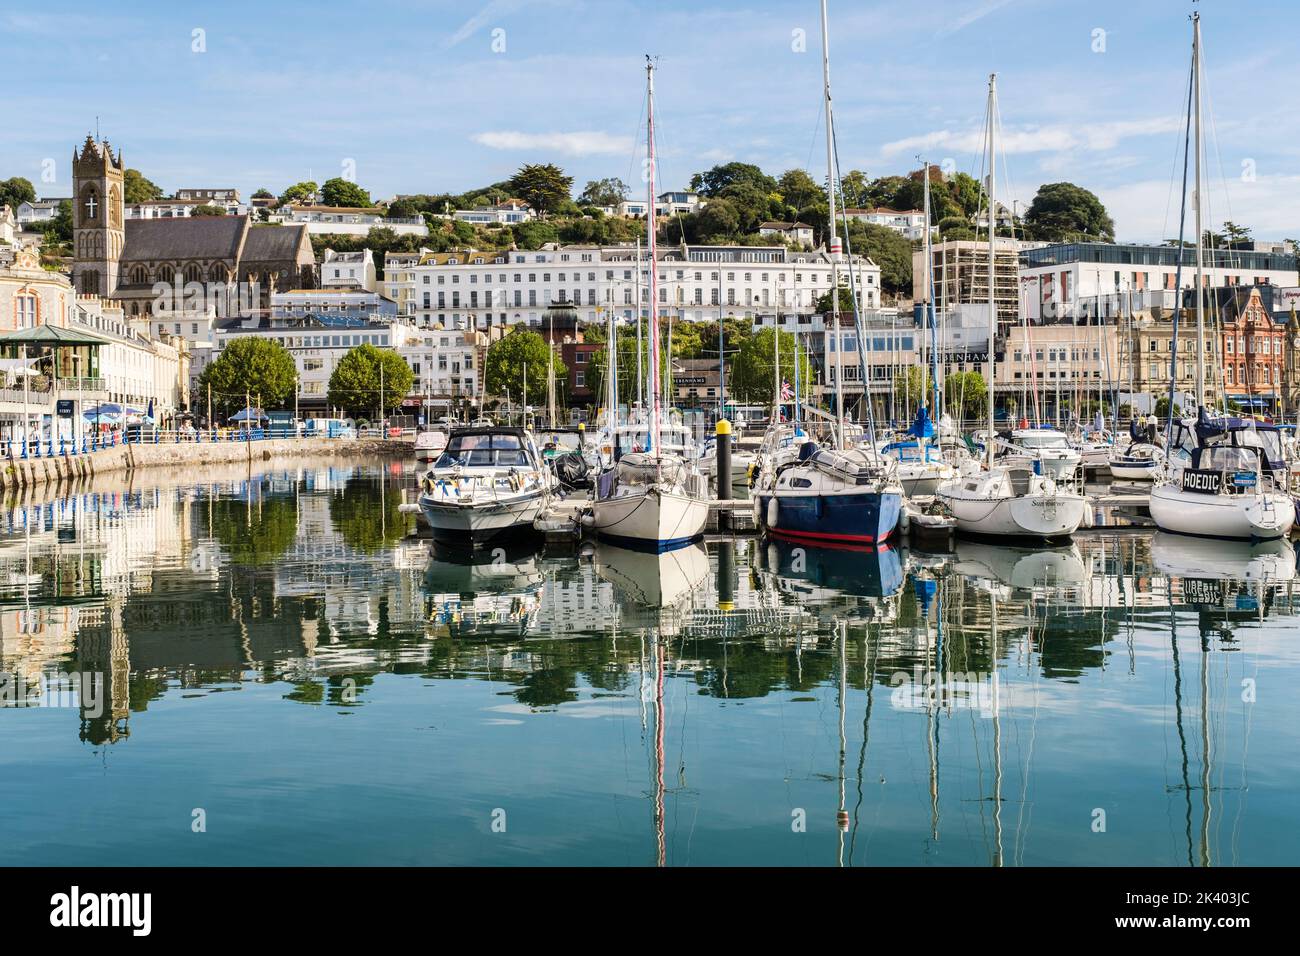 Boats moored in the harbour Inner Dock reflected in the calm water. Torquay, Devon, England, UK, Britain Stock Photo